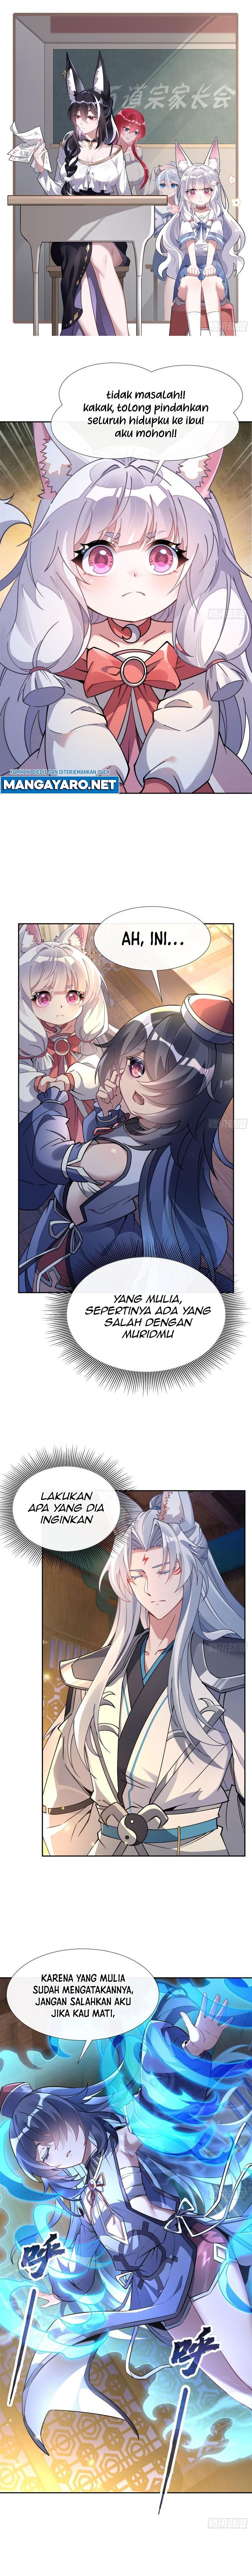 Dilarang COPAS - situs resmi www.mangacanblog.com - Komik my female apprentices are all big shots from the future 179 - chapter 179 180 Indonesia my female apprentices are all big shots from the future 179 - chapter 179 Terbaru 1|Baca Manga Komik Indonesia|Mangacan